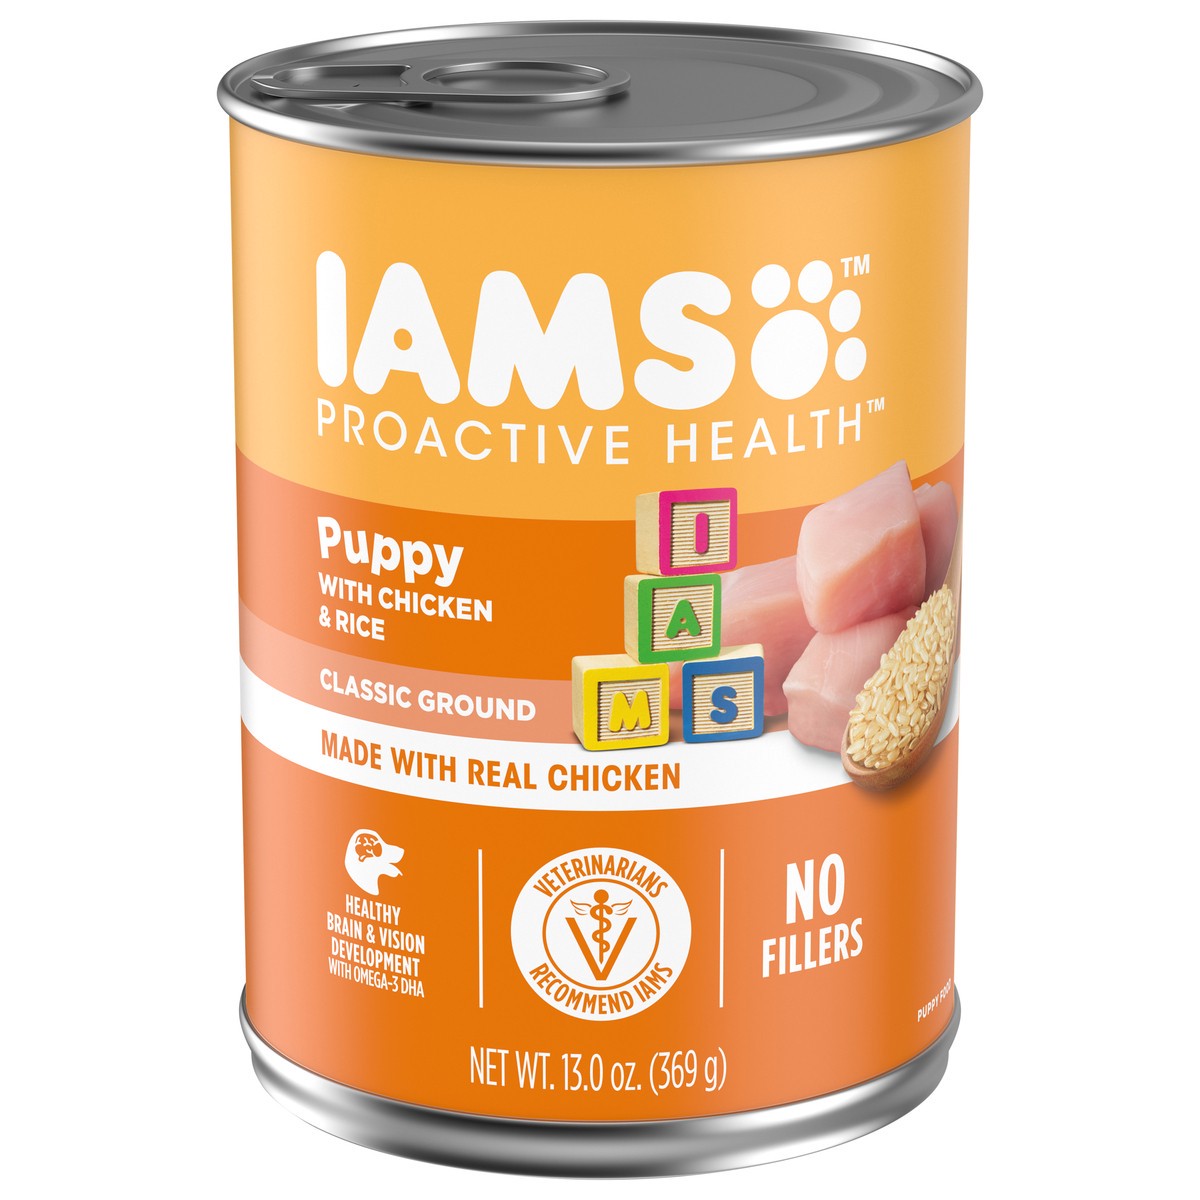 slide 1 of 9, Proactive Health Classic Ground Puppy with Chicken and Rice Dog Food 13 oz, 13 oz